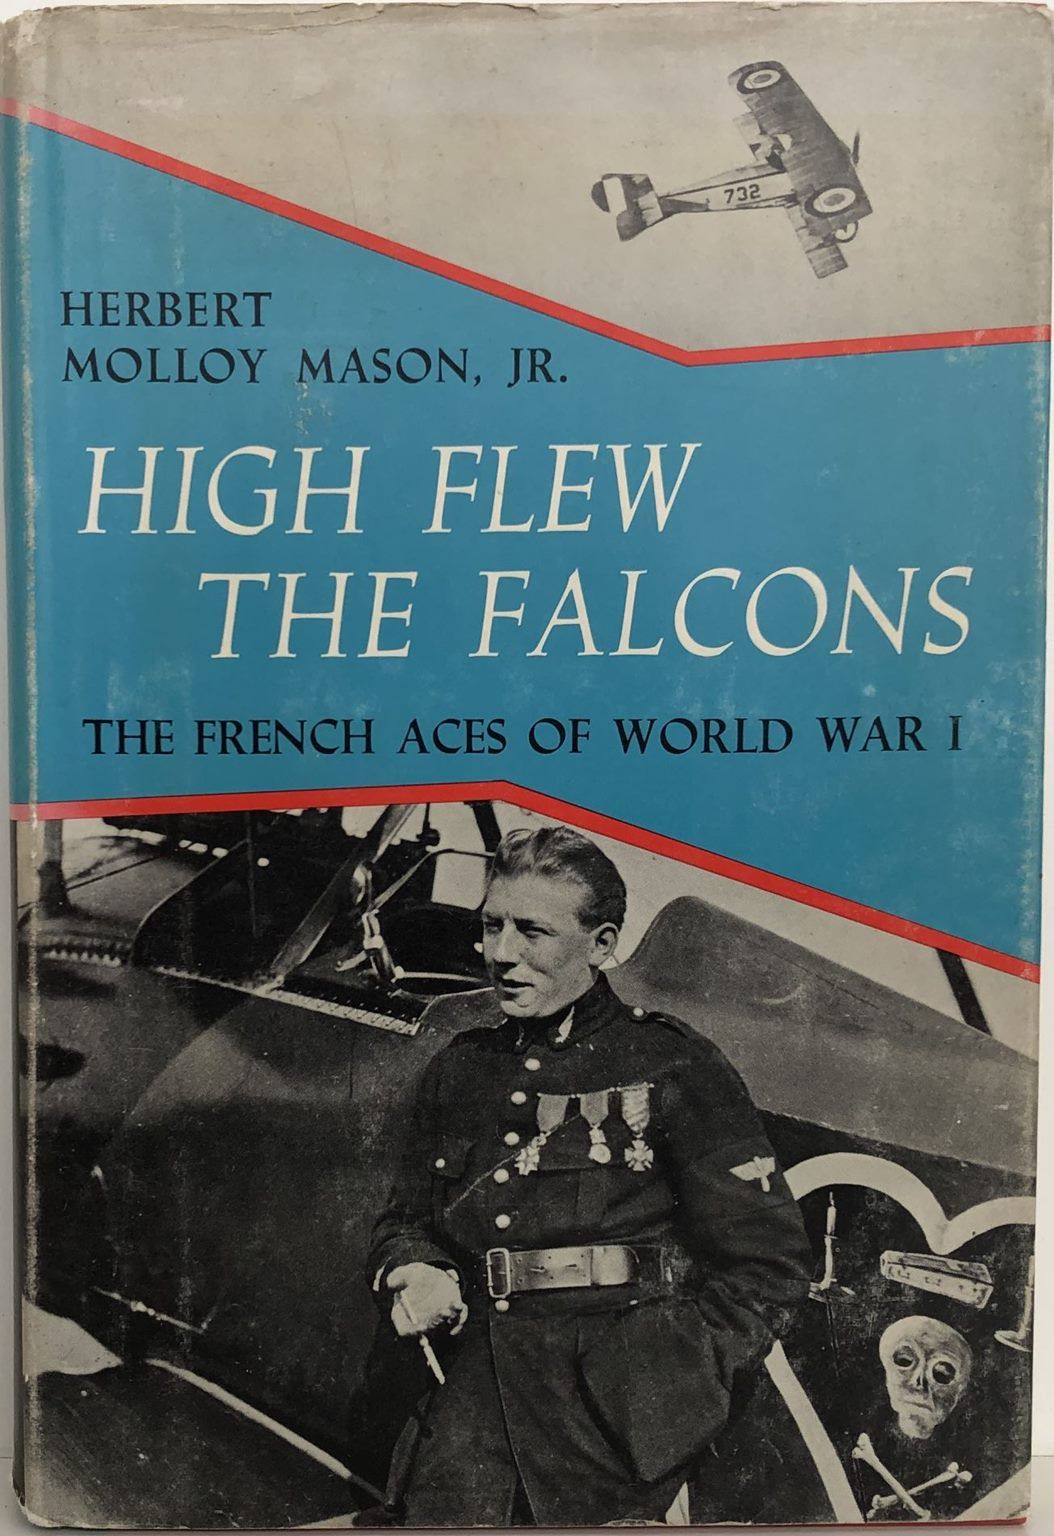 HIGH FLEW THE FALCONS: The French Aces of World War I